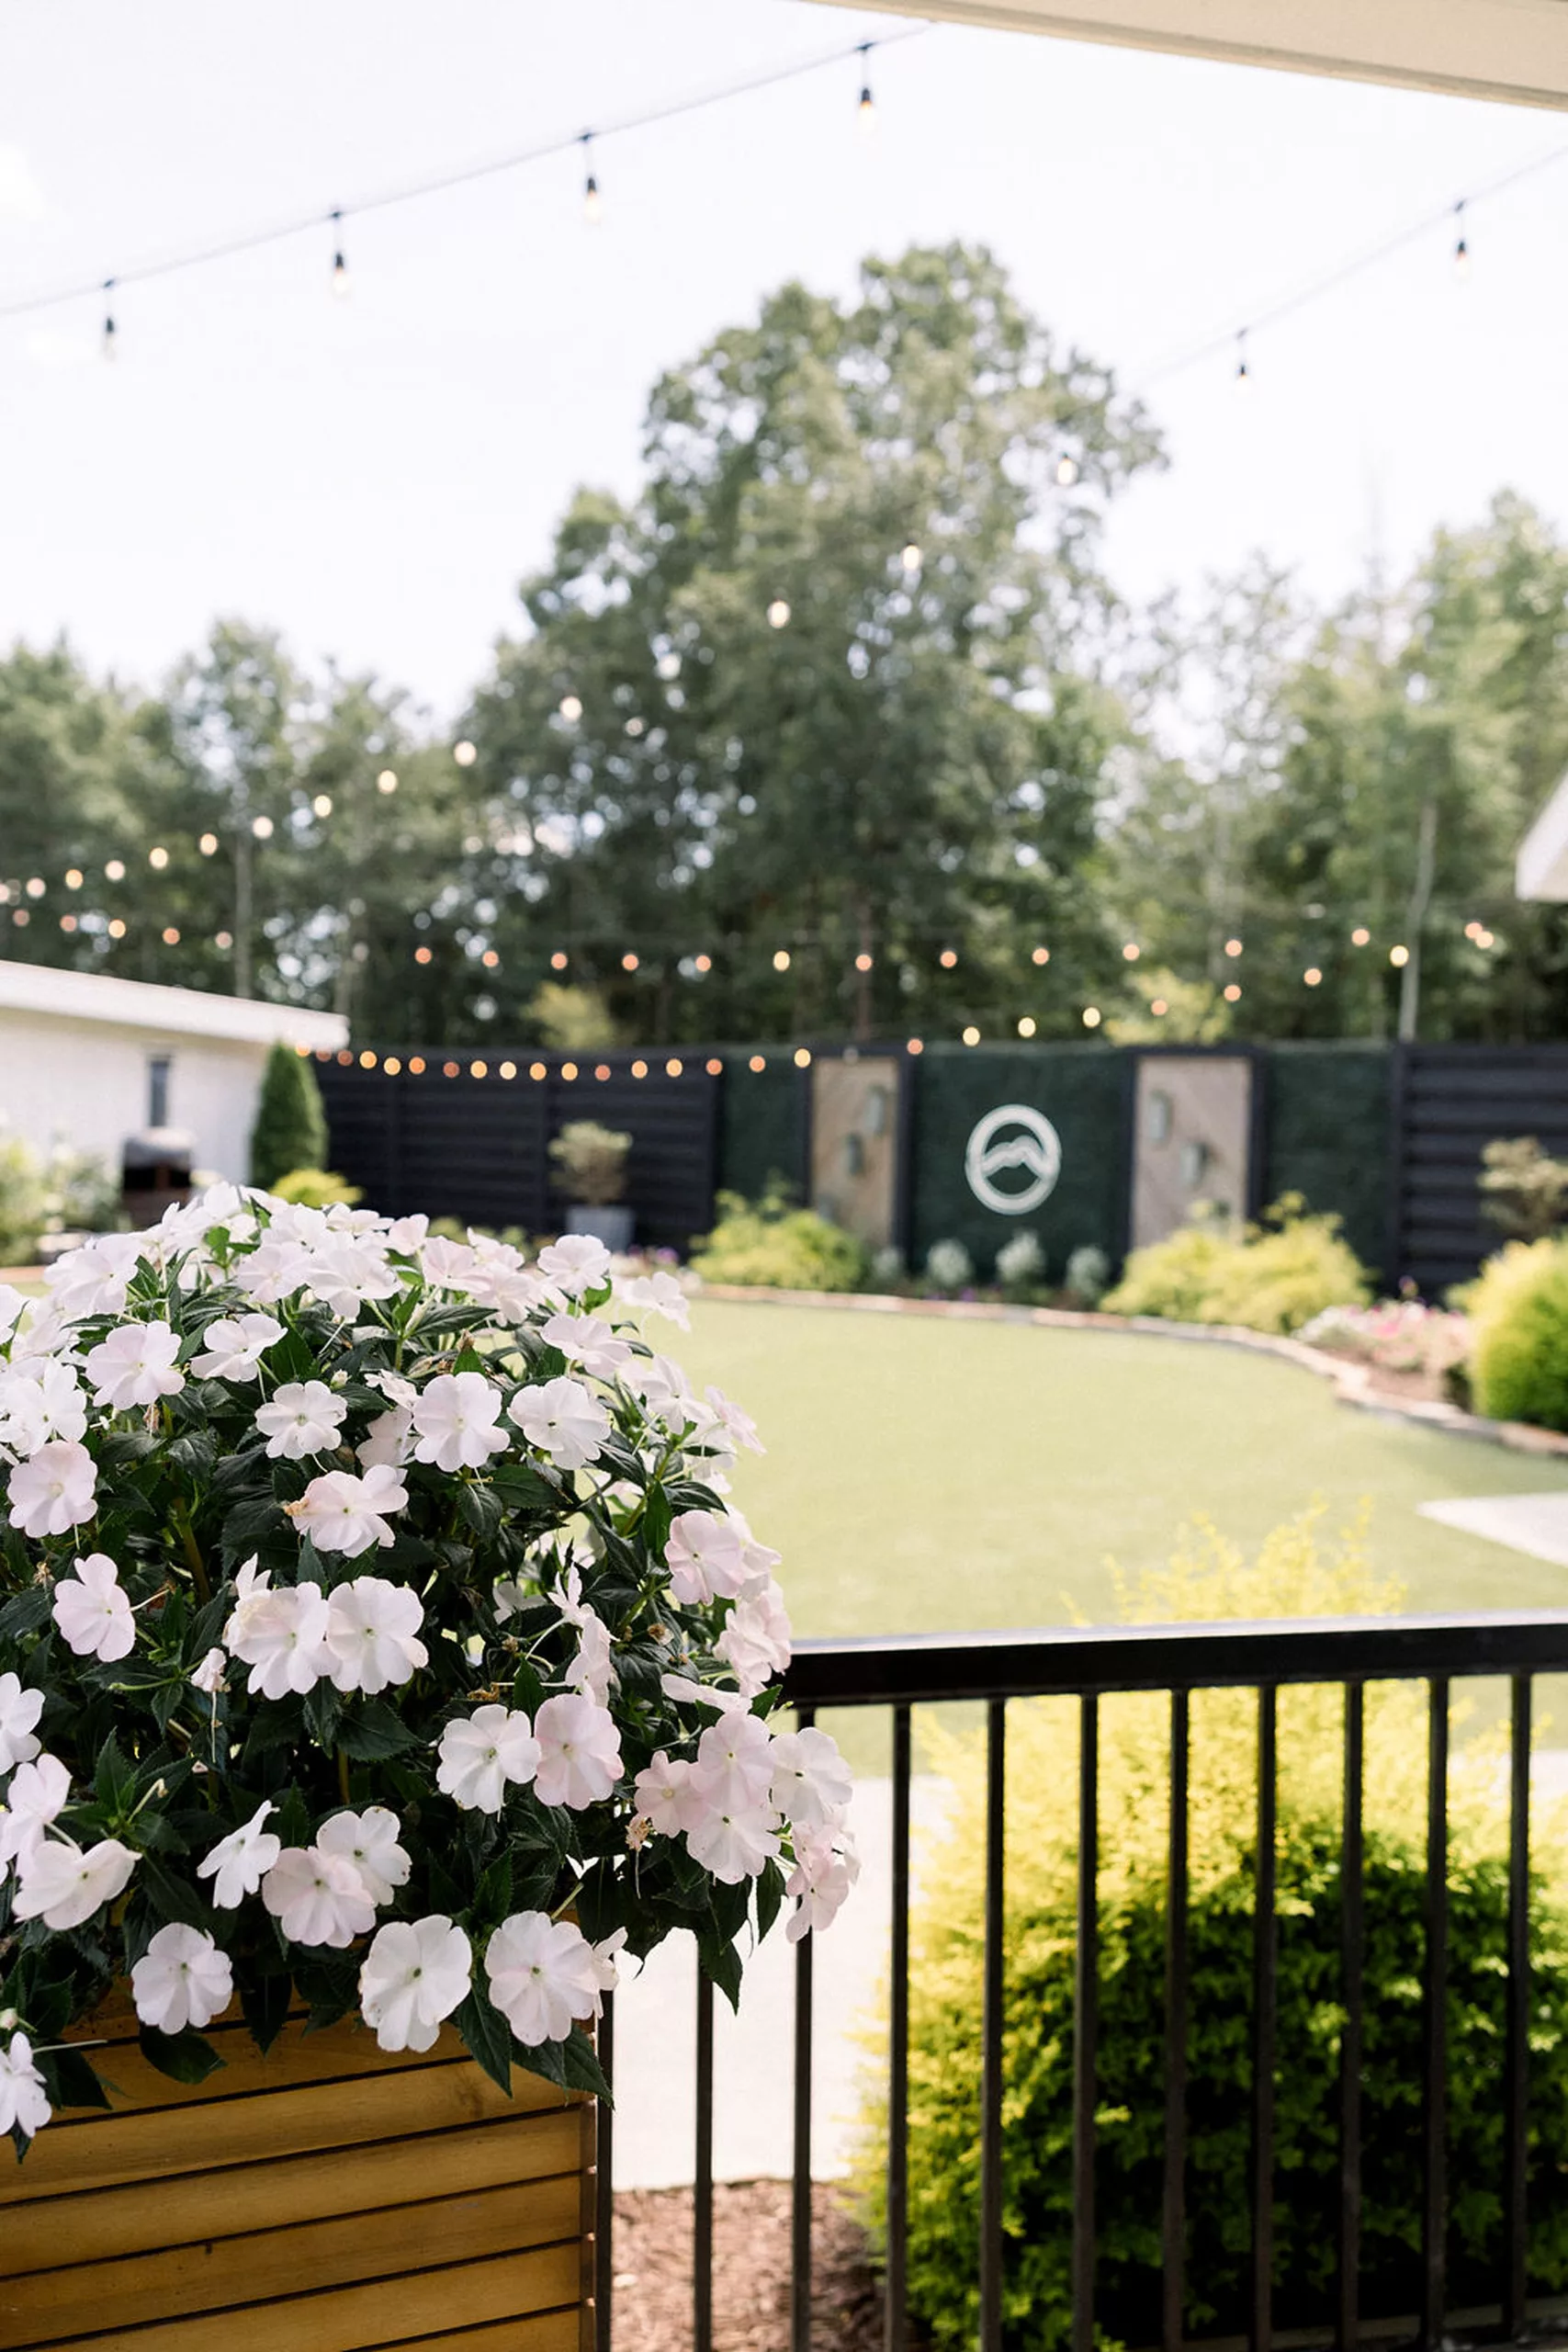 Details of a lawn set up for a wedding reception with market lights and white florals